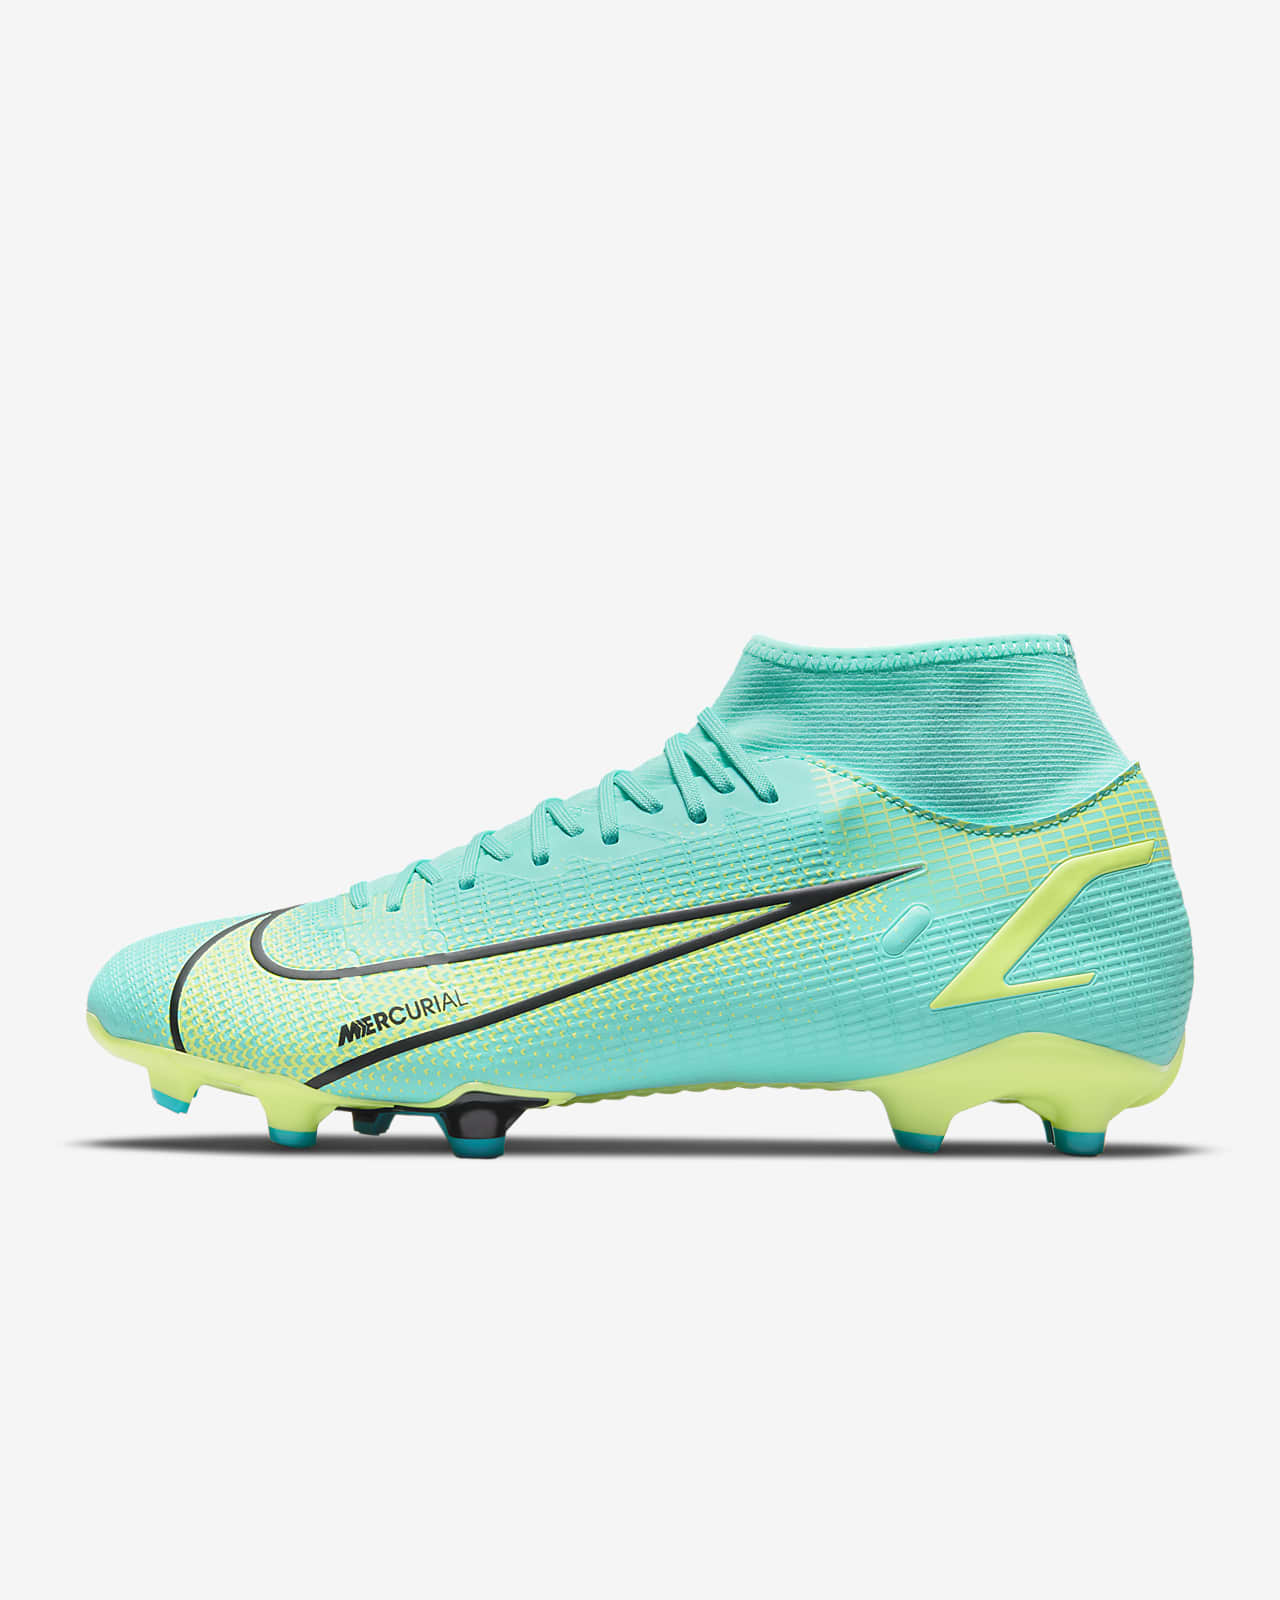 Chaussure de football à crampons multi-surfaces Nike Mercurial Superfly 8 Academy MG